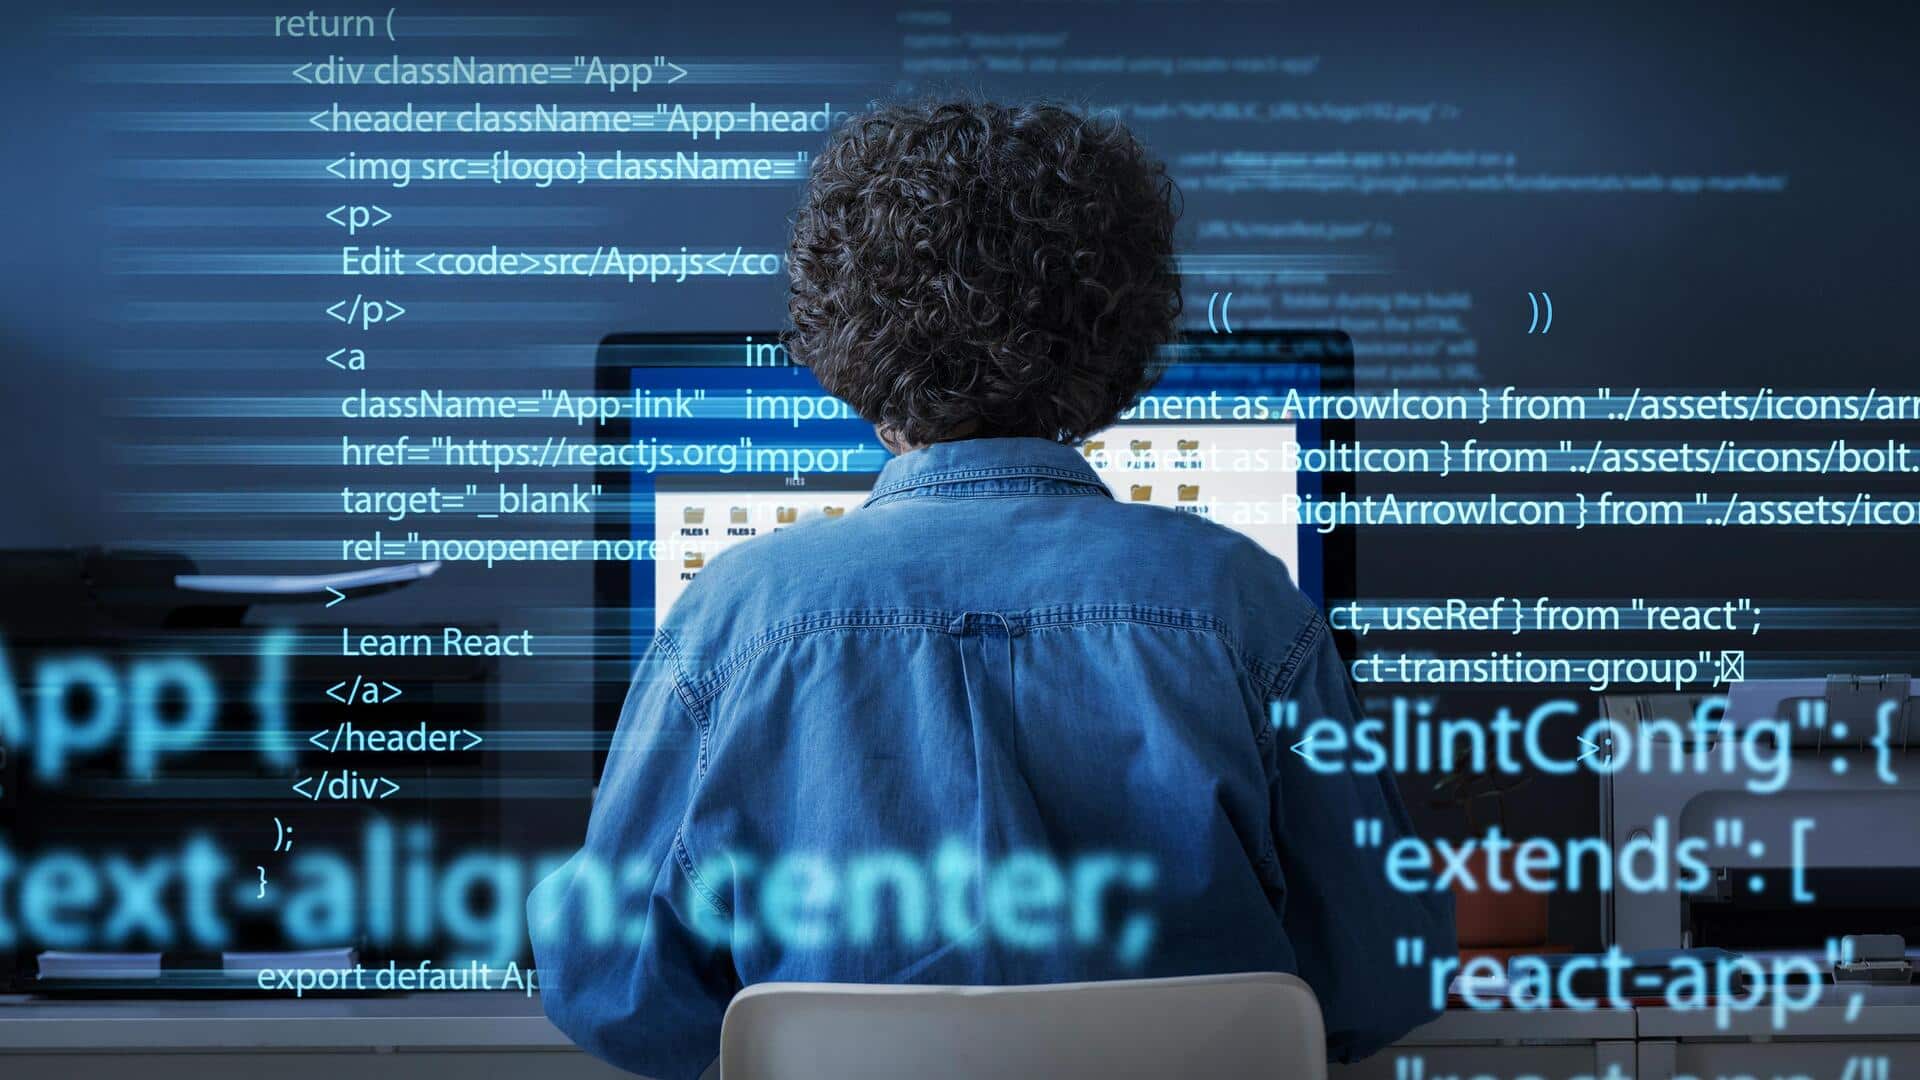 #CareerBytes: Want to learn coding? Here's a beginner's guide